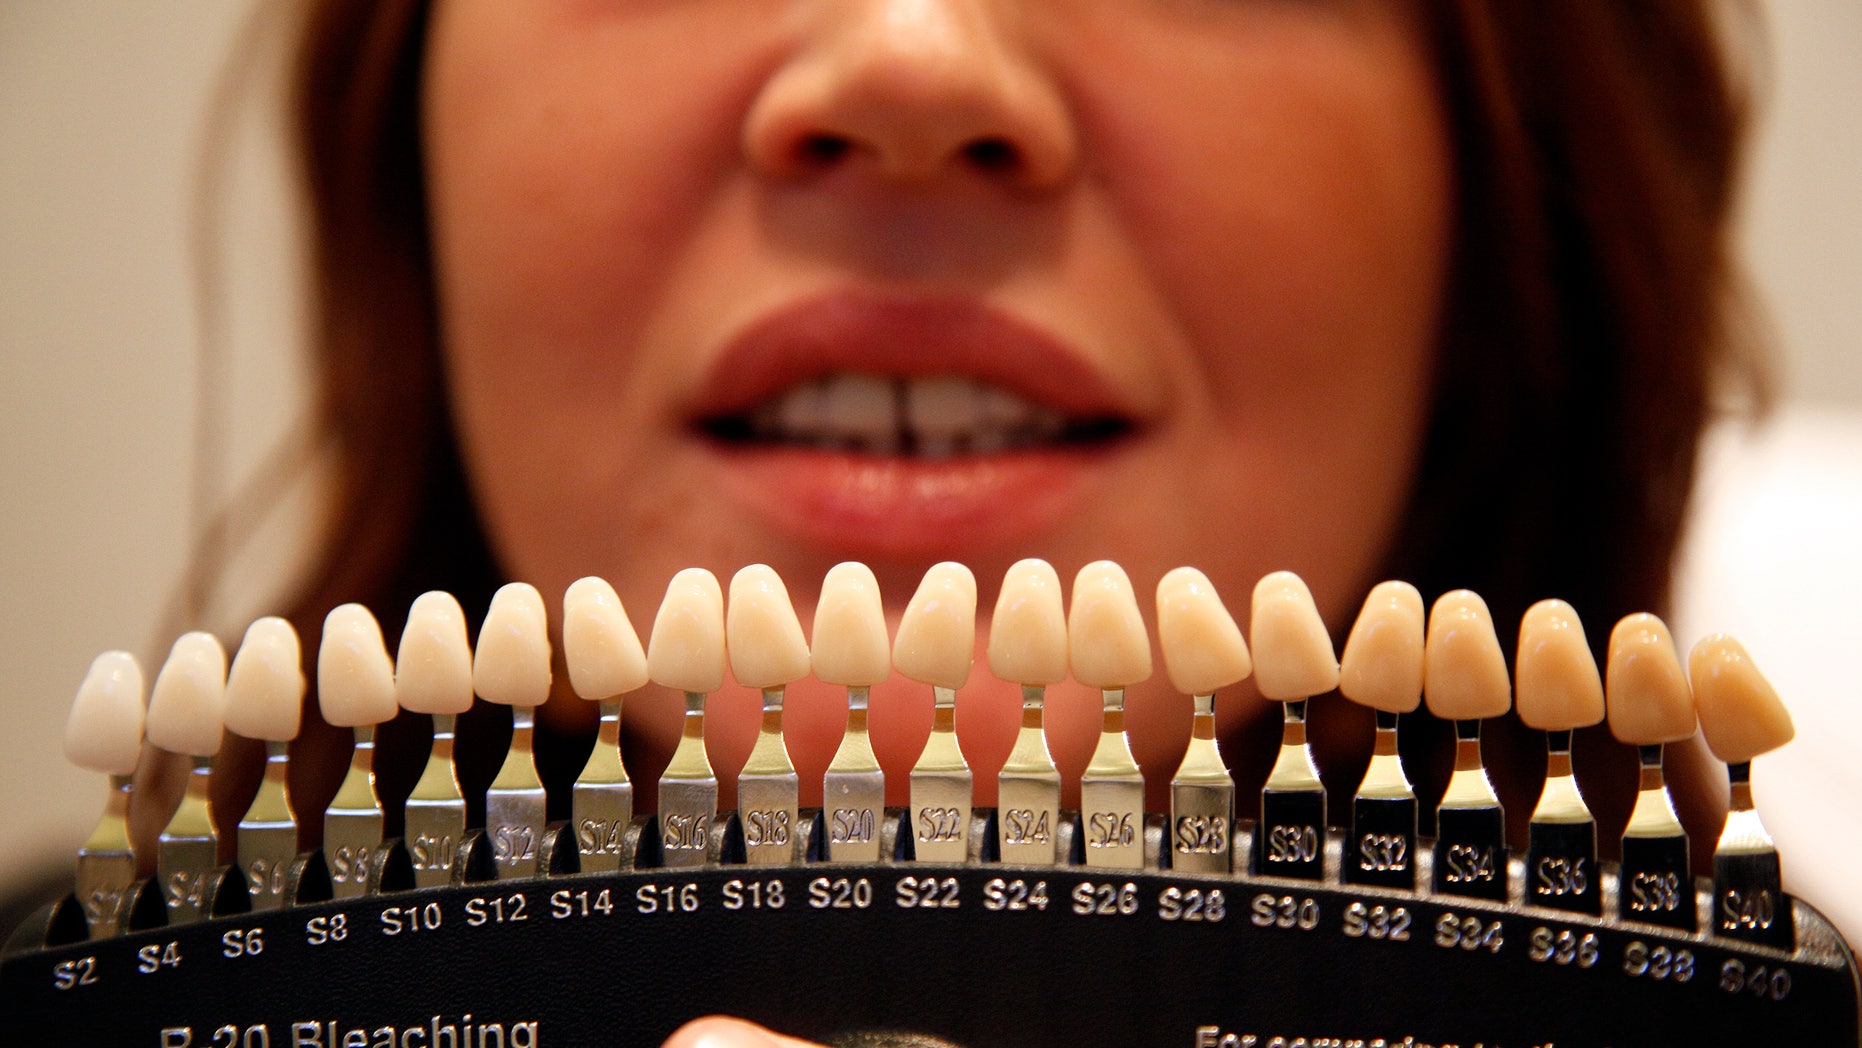 Dental Tooth Color Chart